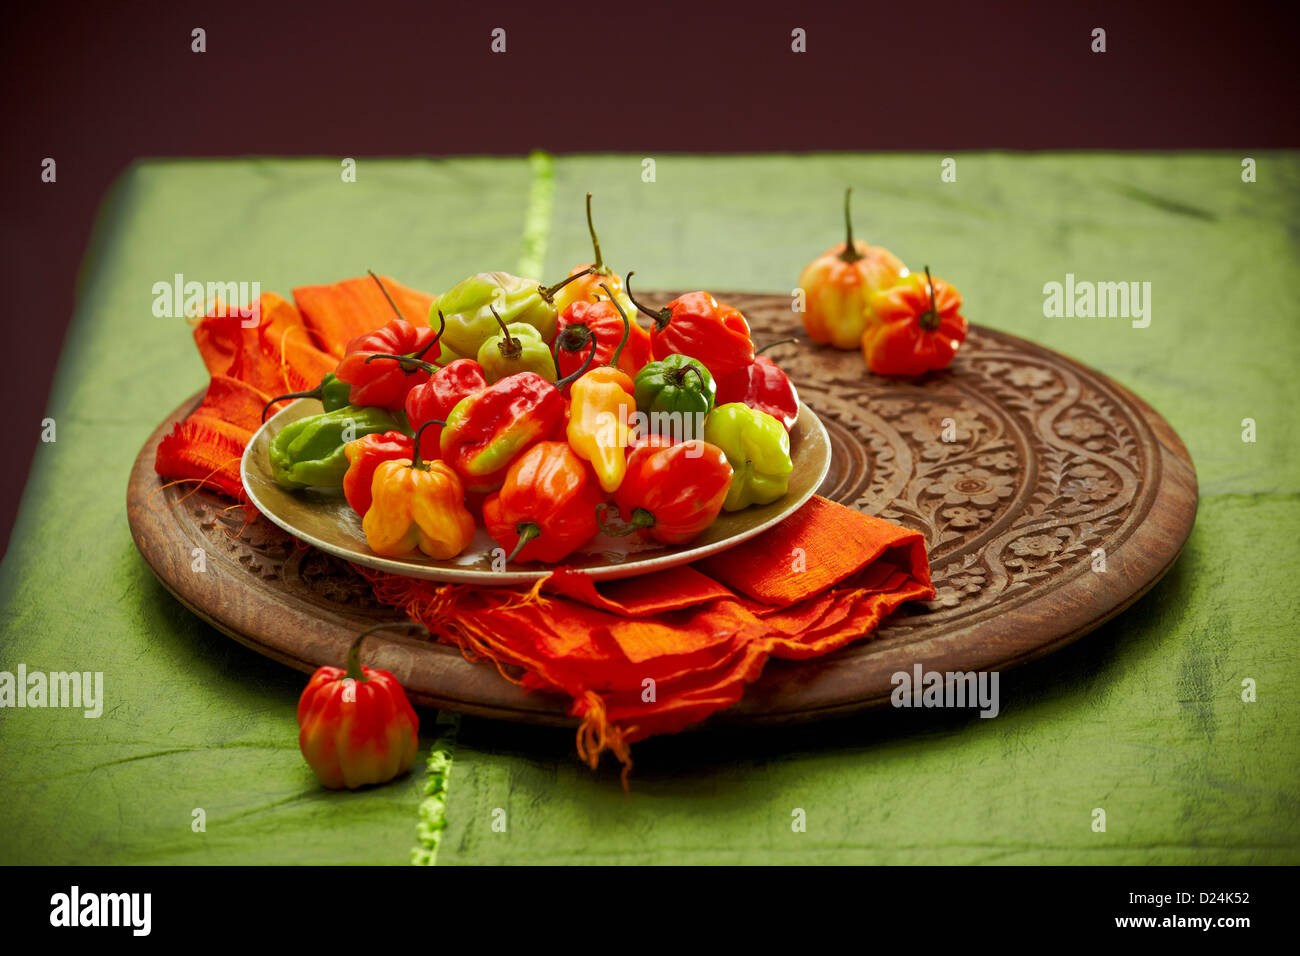 A plate of Scotch bonnet peppers on a carved wooden board Stock Photo